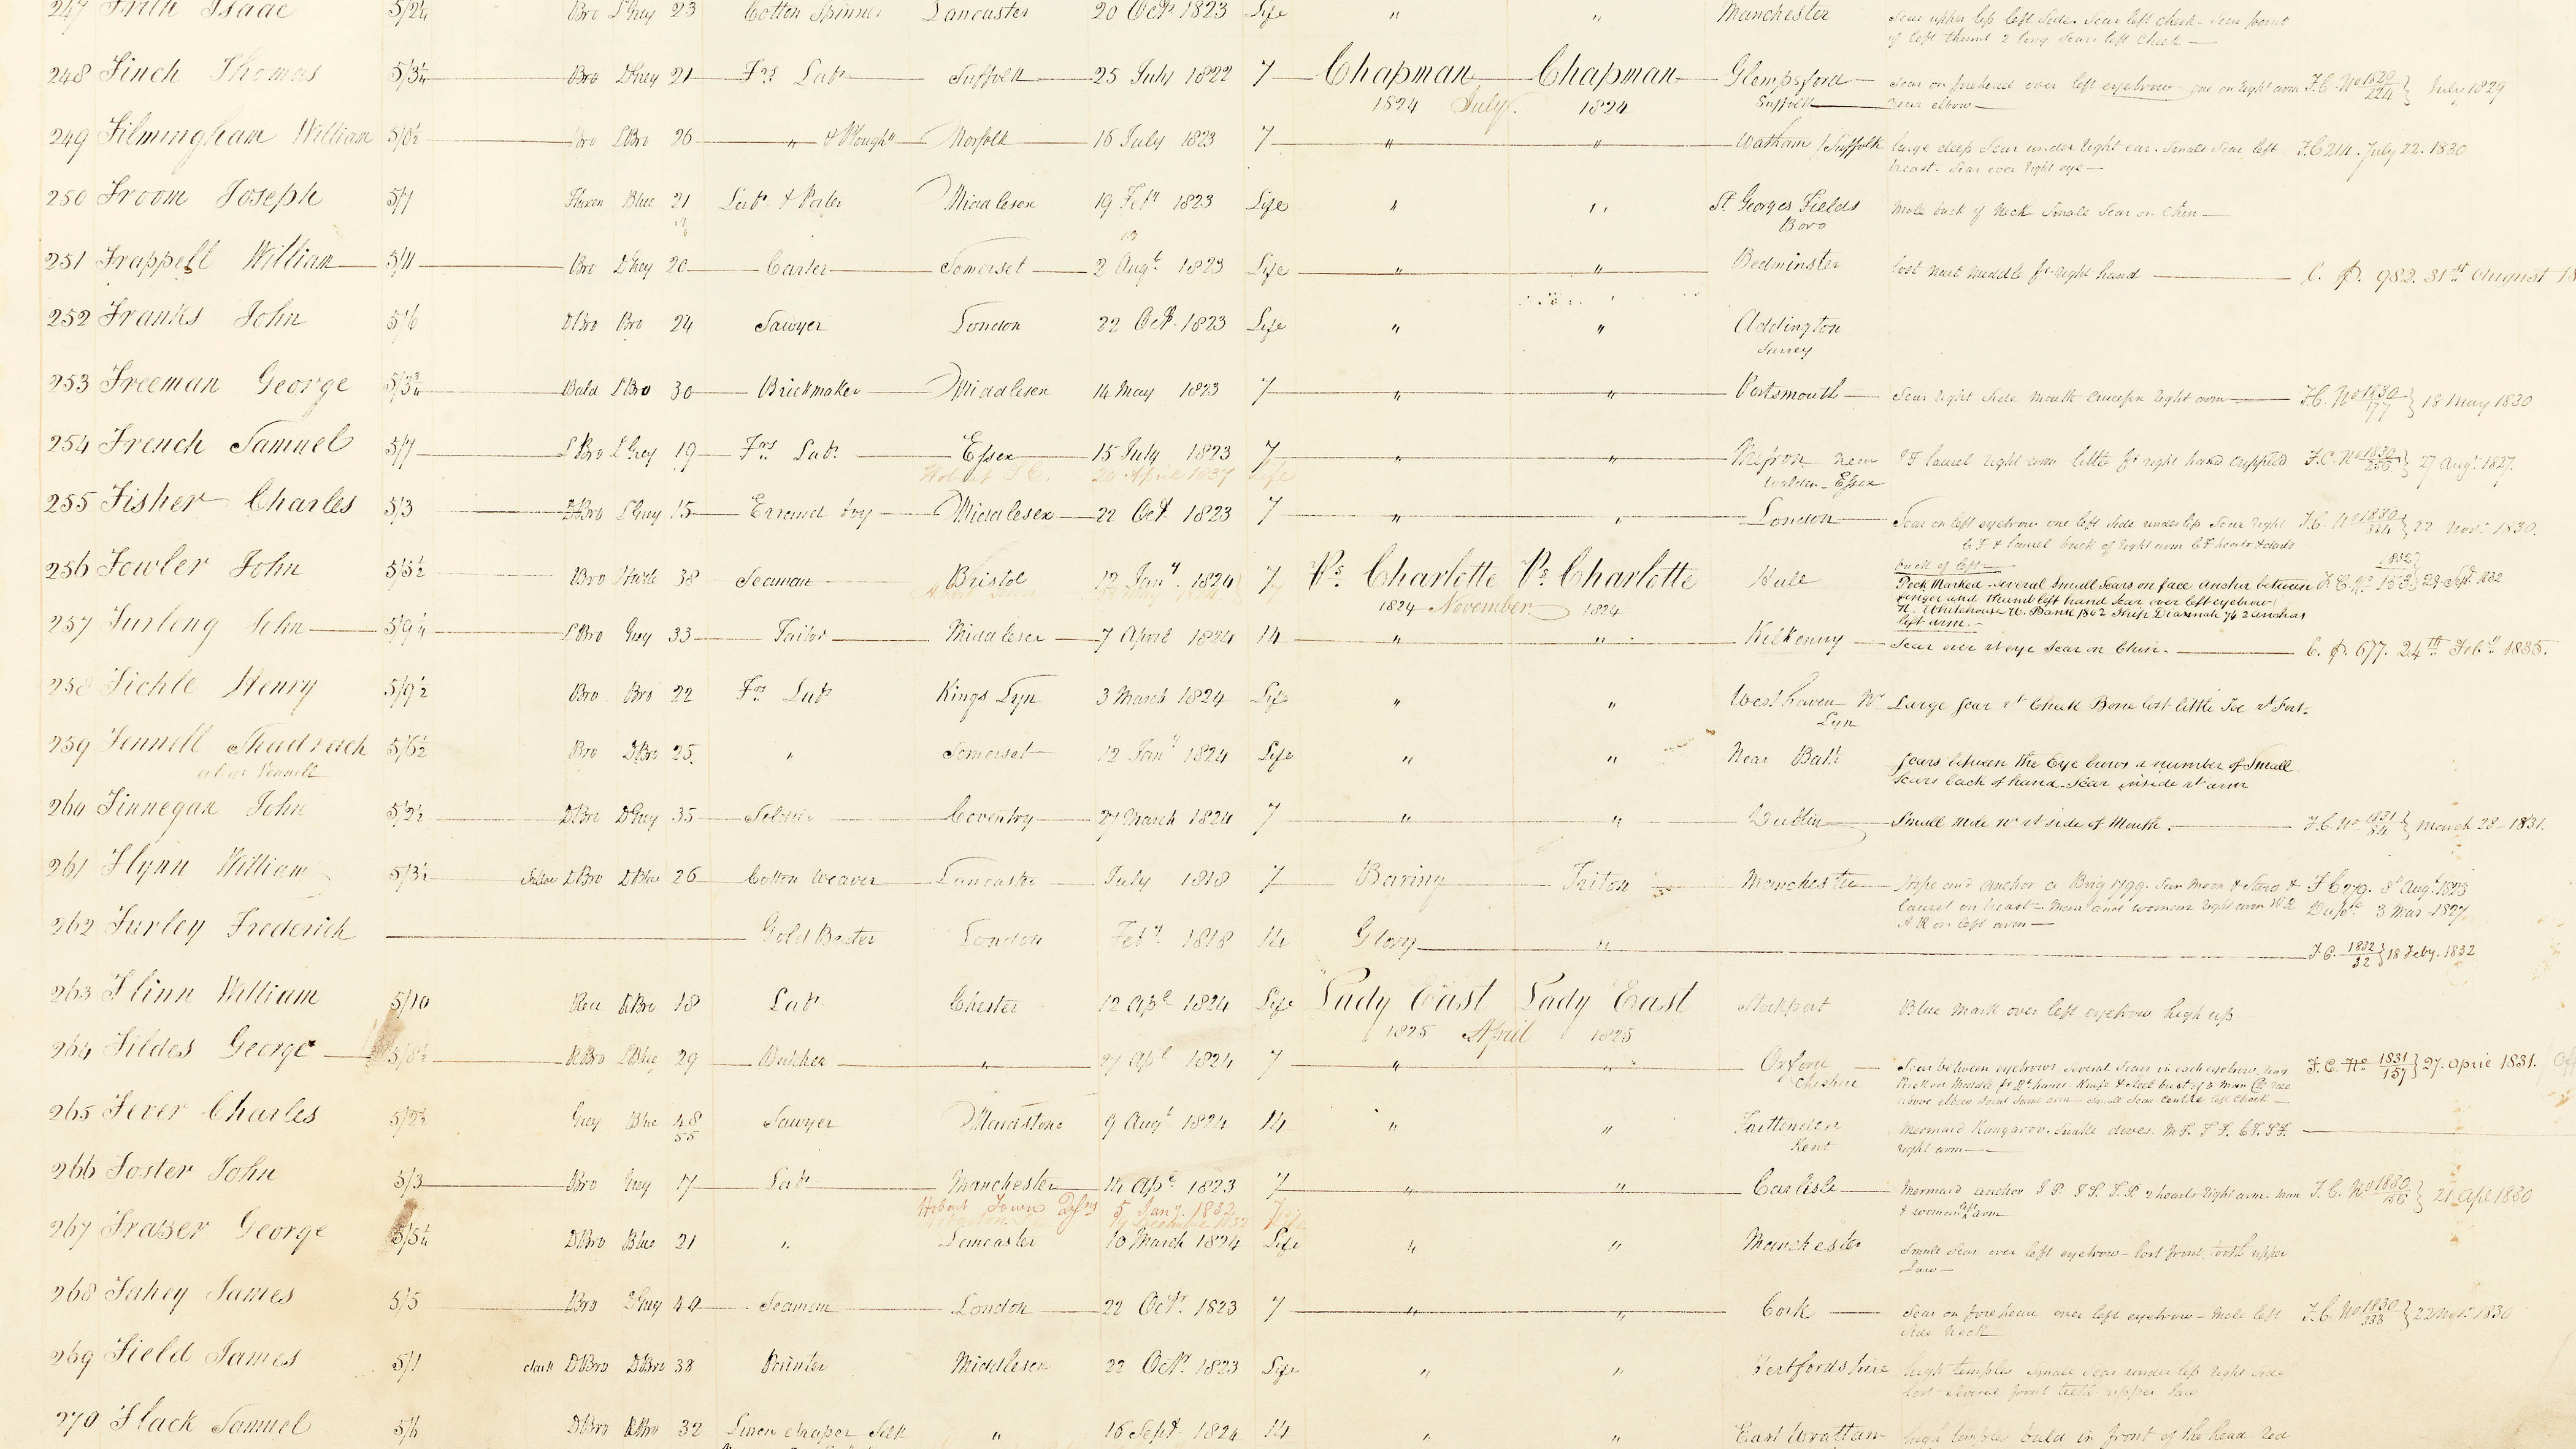 Excerpt from ledgers held as part of Brickendon Estate’s archives mentioning Shadrack Fennell.